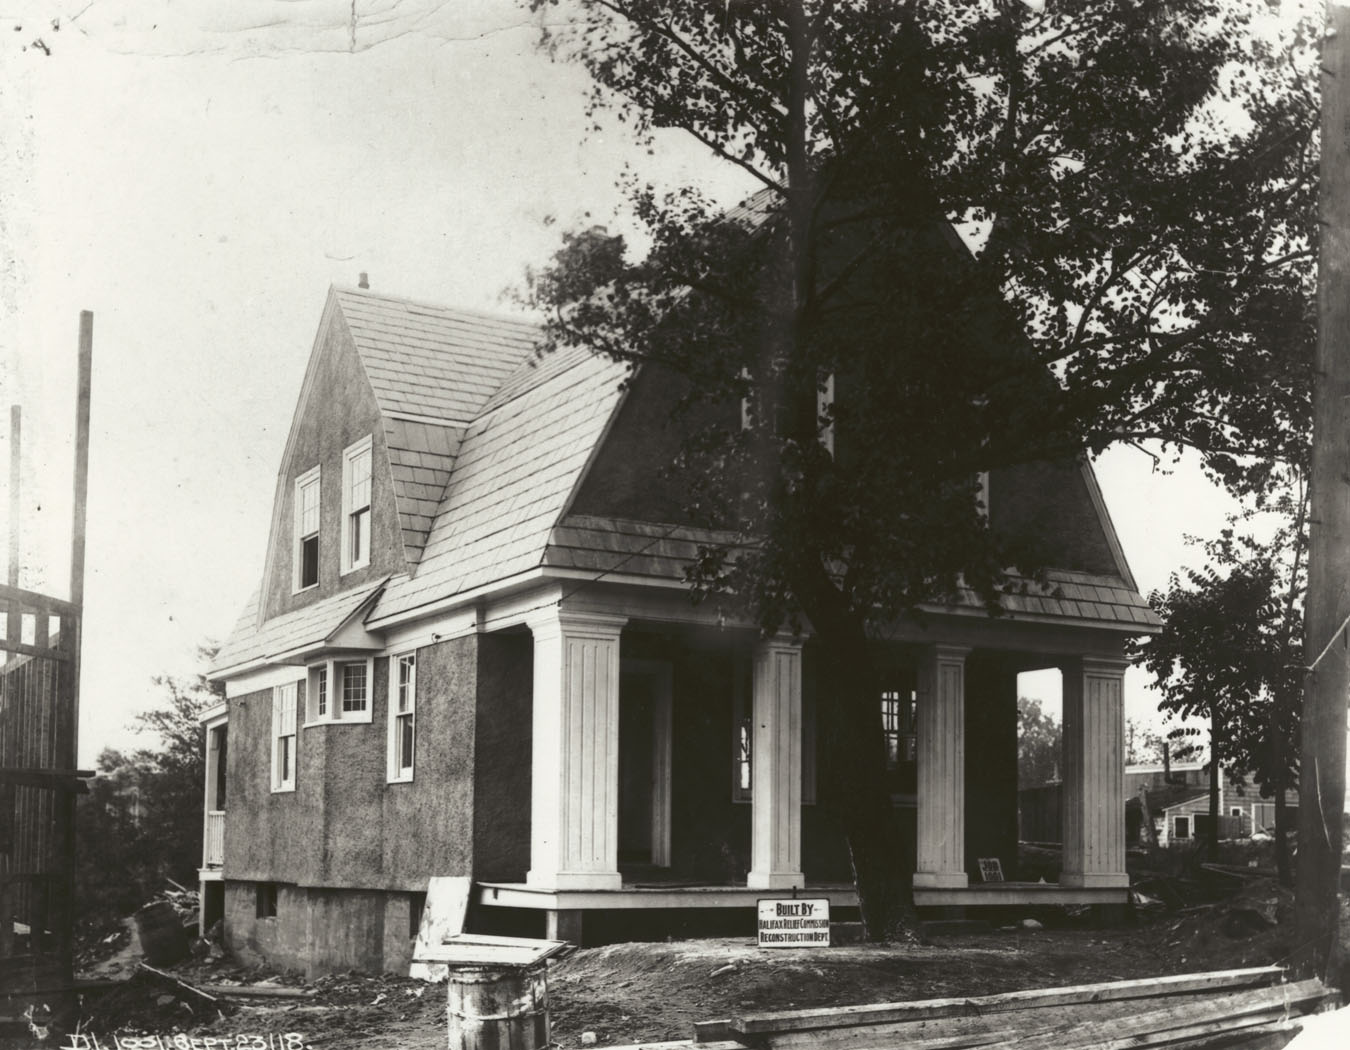 Original photograph copied through the courtesy of Mrs. Shirley Vaughan.  This house, Ross & Macdonald design D.1, was built for A.M. Strong.  Its present address is 5410 Young Street.